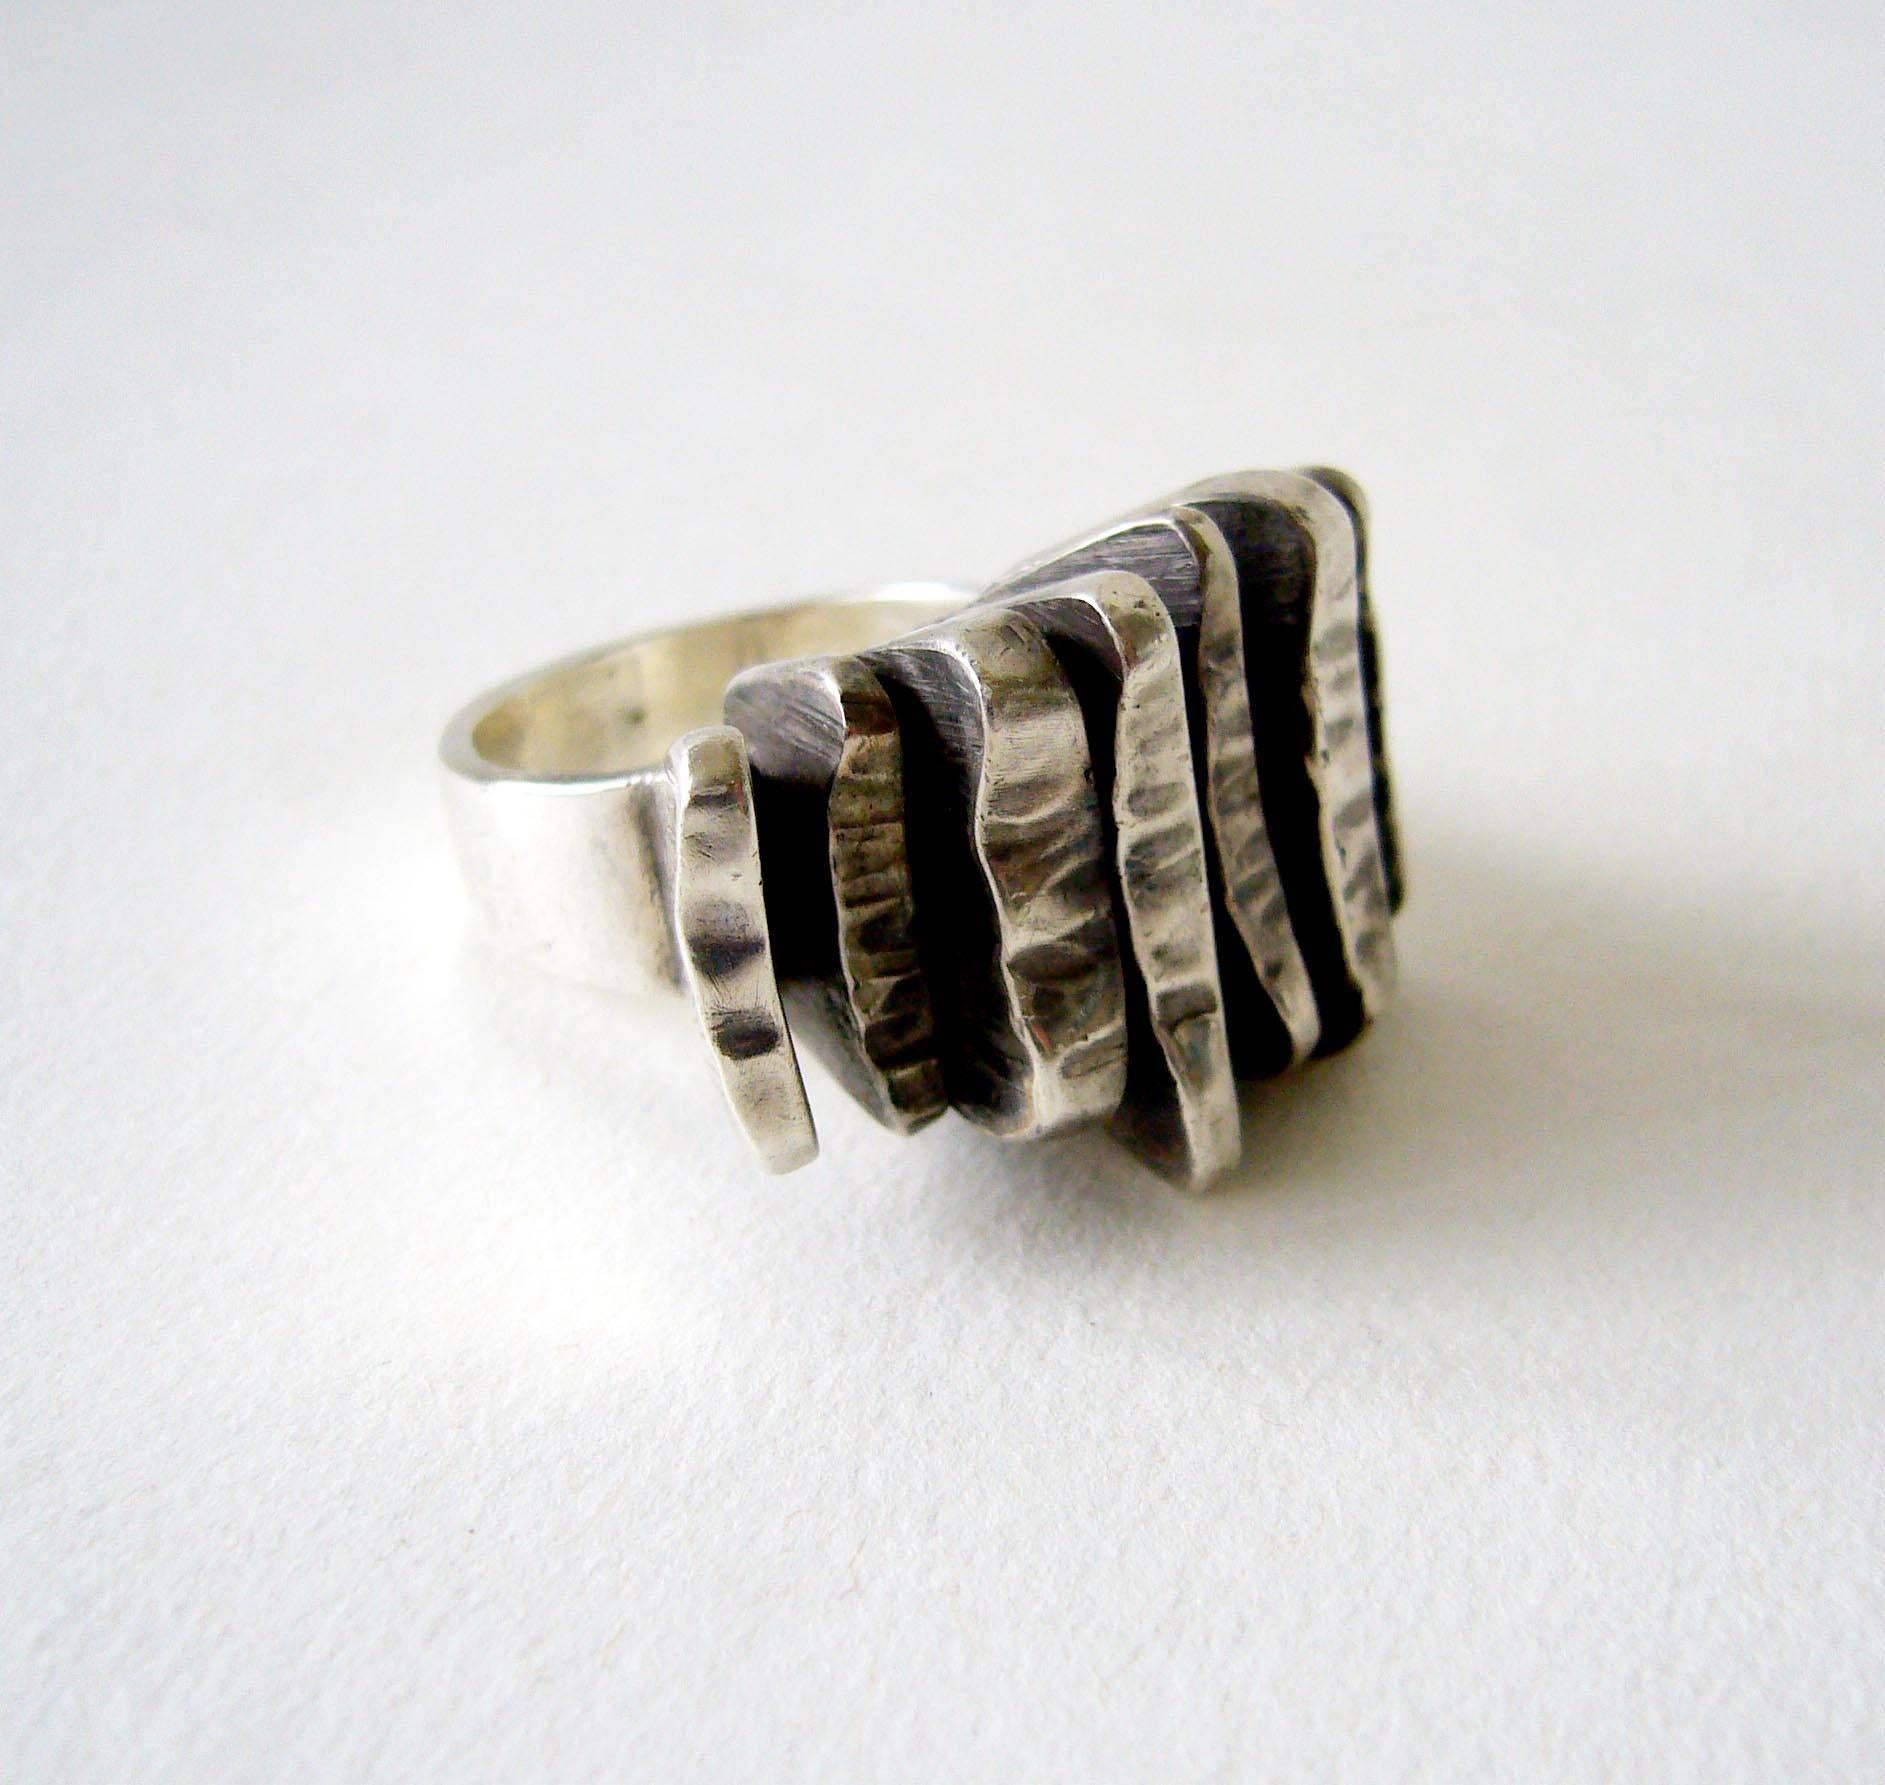 Heavy metal ring by Rey Urban for the Danish firm Aage Fausing, circa 1970's.  Ring is a finger size 7.25 and is signed A. Fausing, 925, Denmark on the inside shank.  In very good vintage condition.  